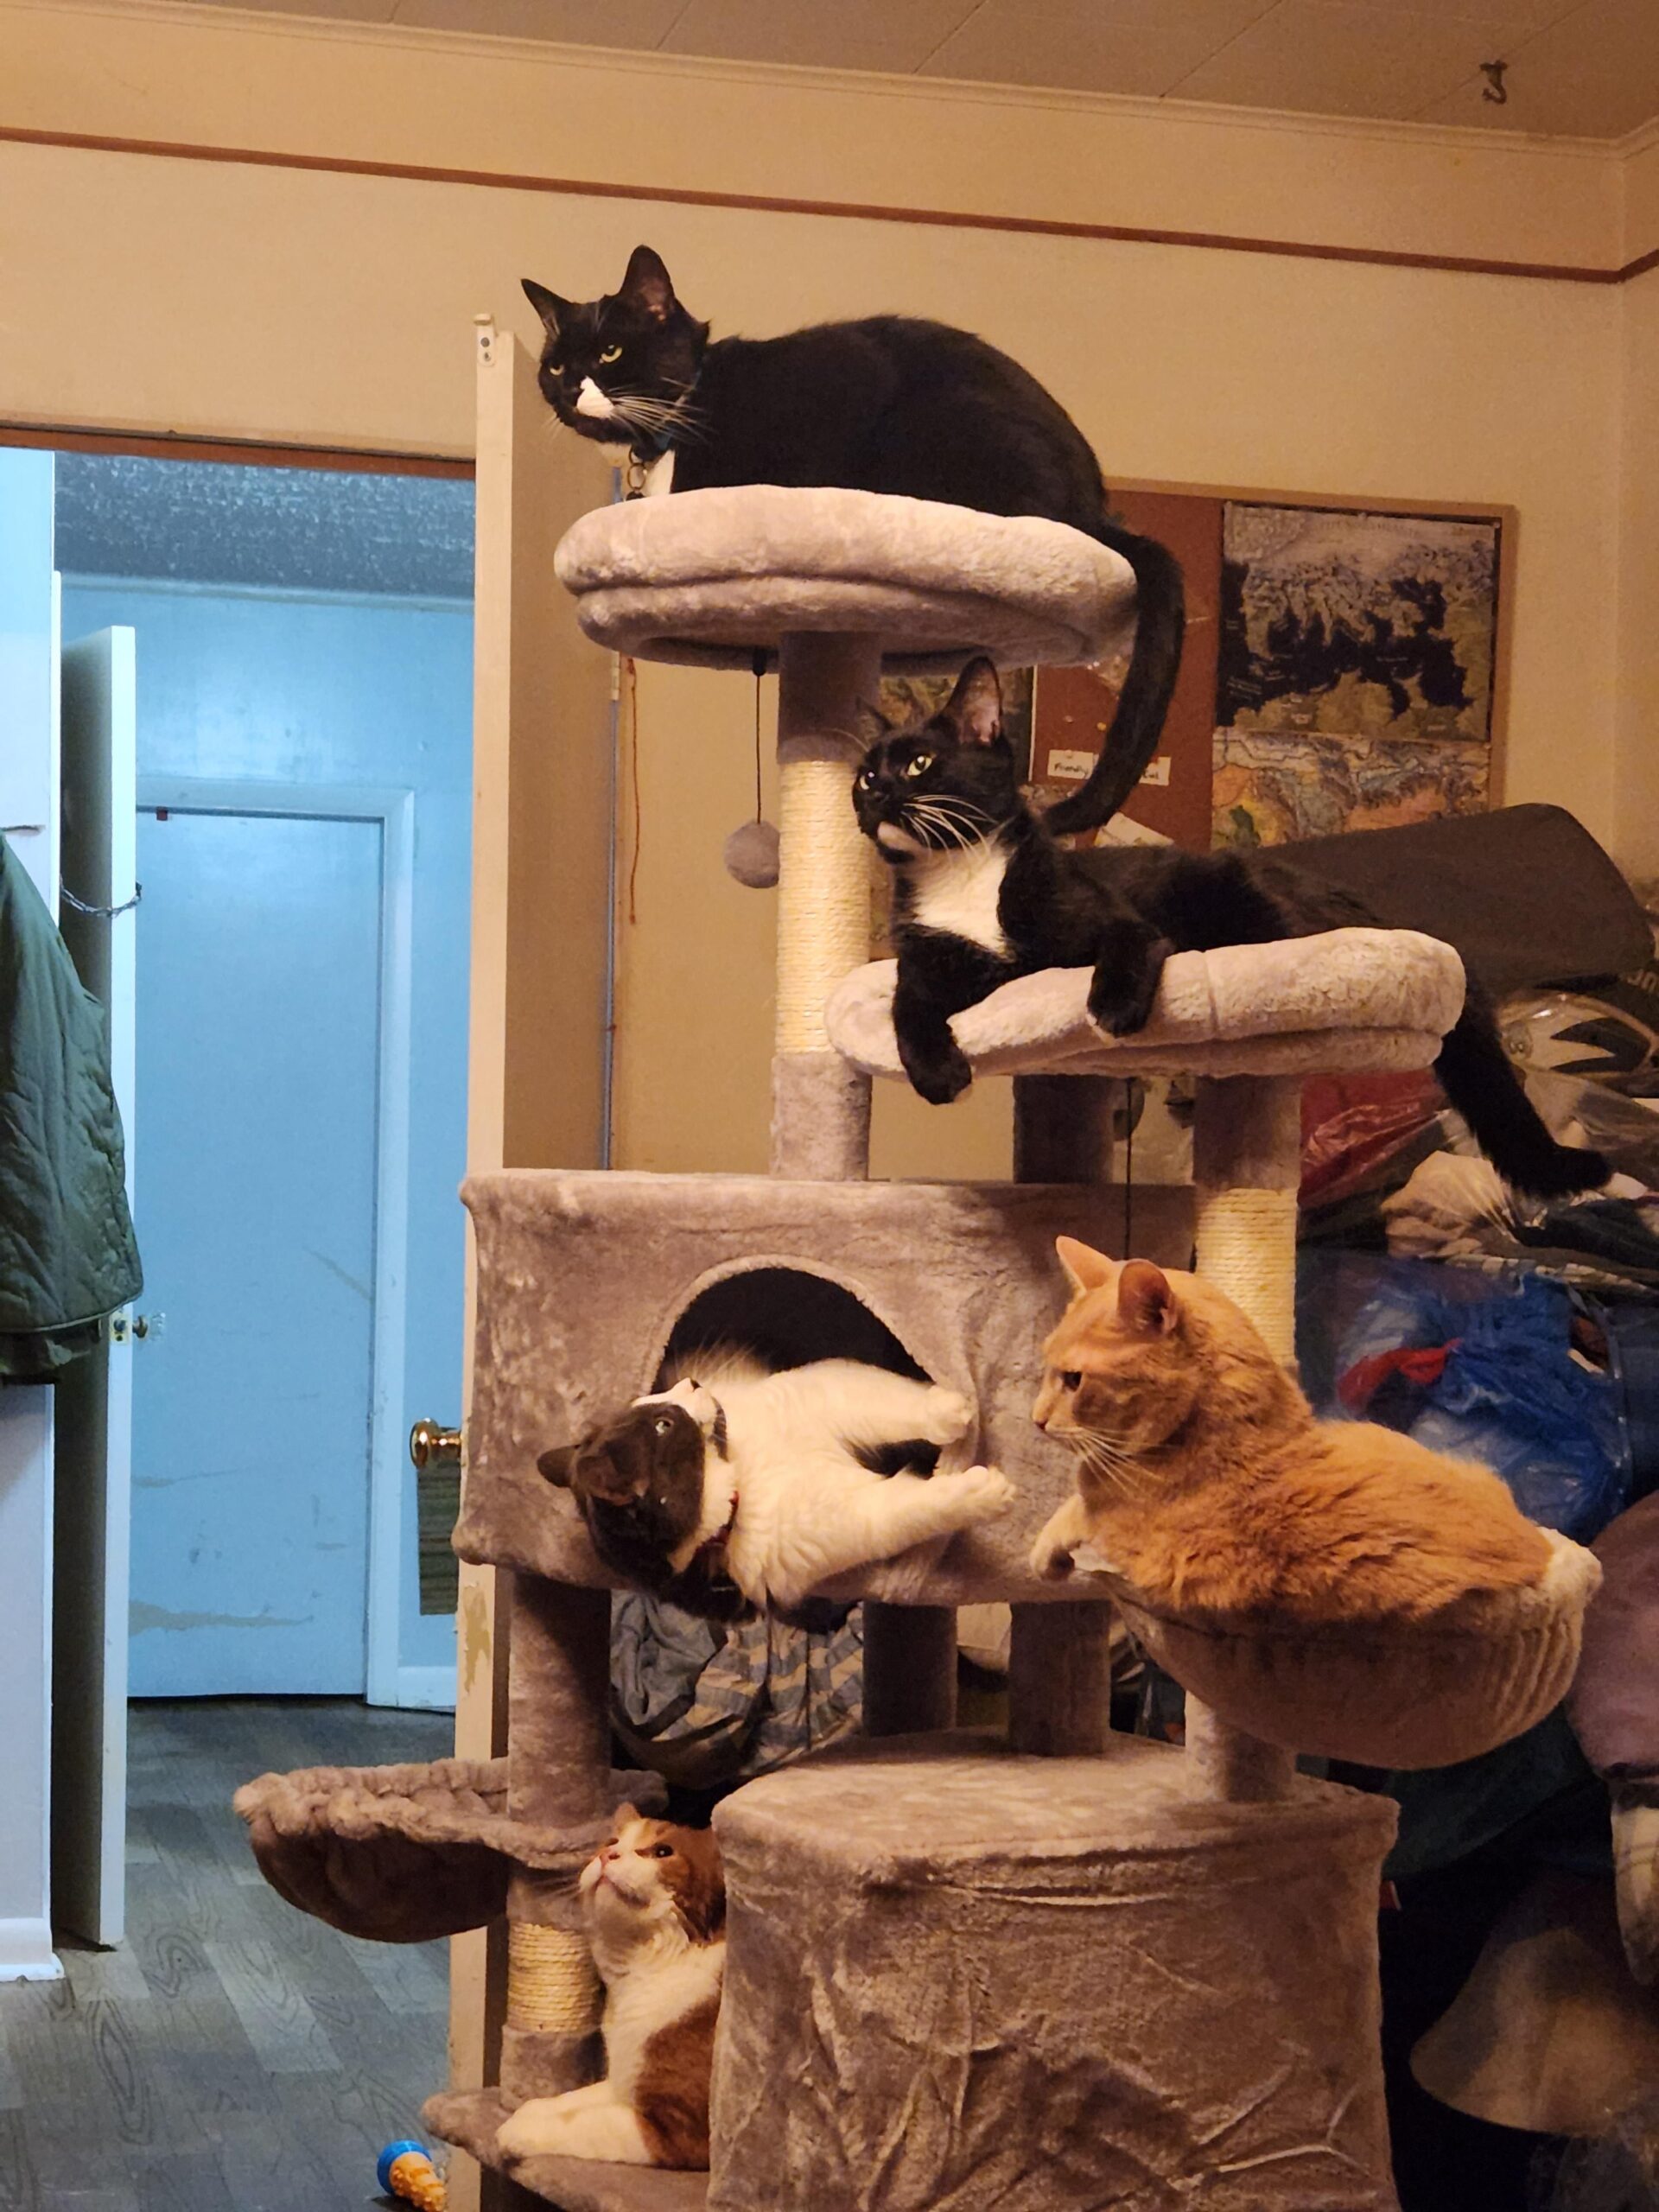 My simplest chums bought a original cat tree for Christmas